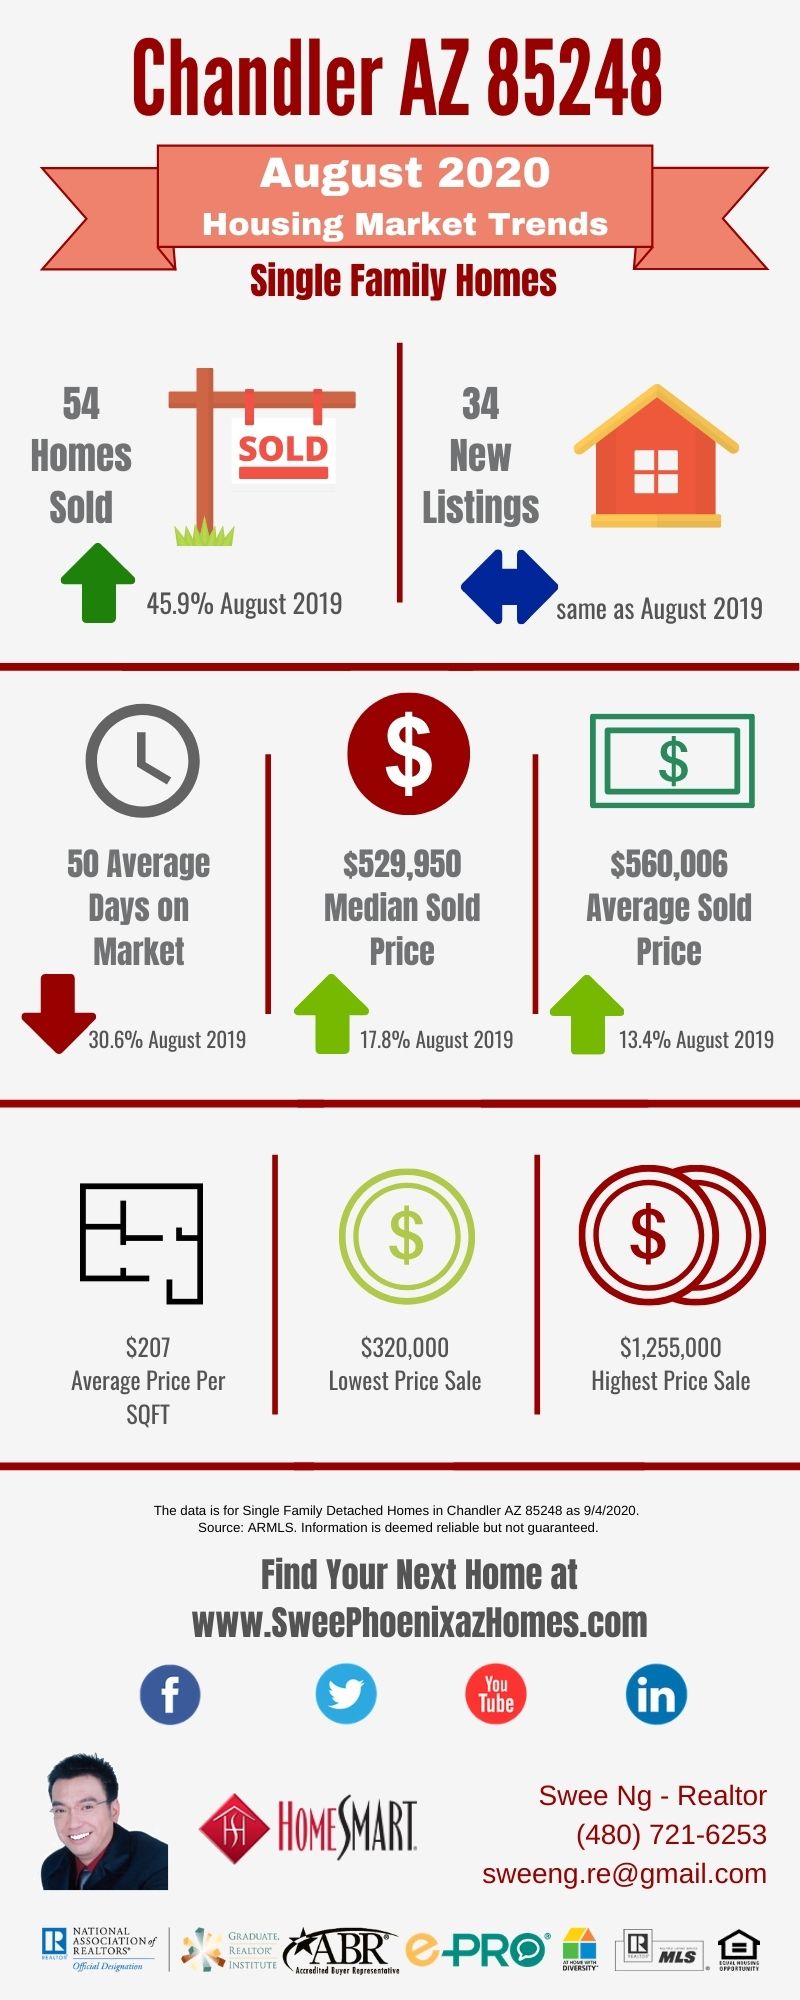 Chandler AZ 85248 Housing Market Trends Report August 2020, House Value, Real Estate and Statistic by Swee Ng